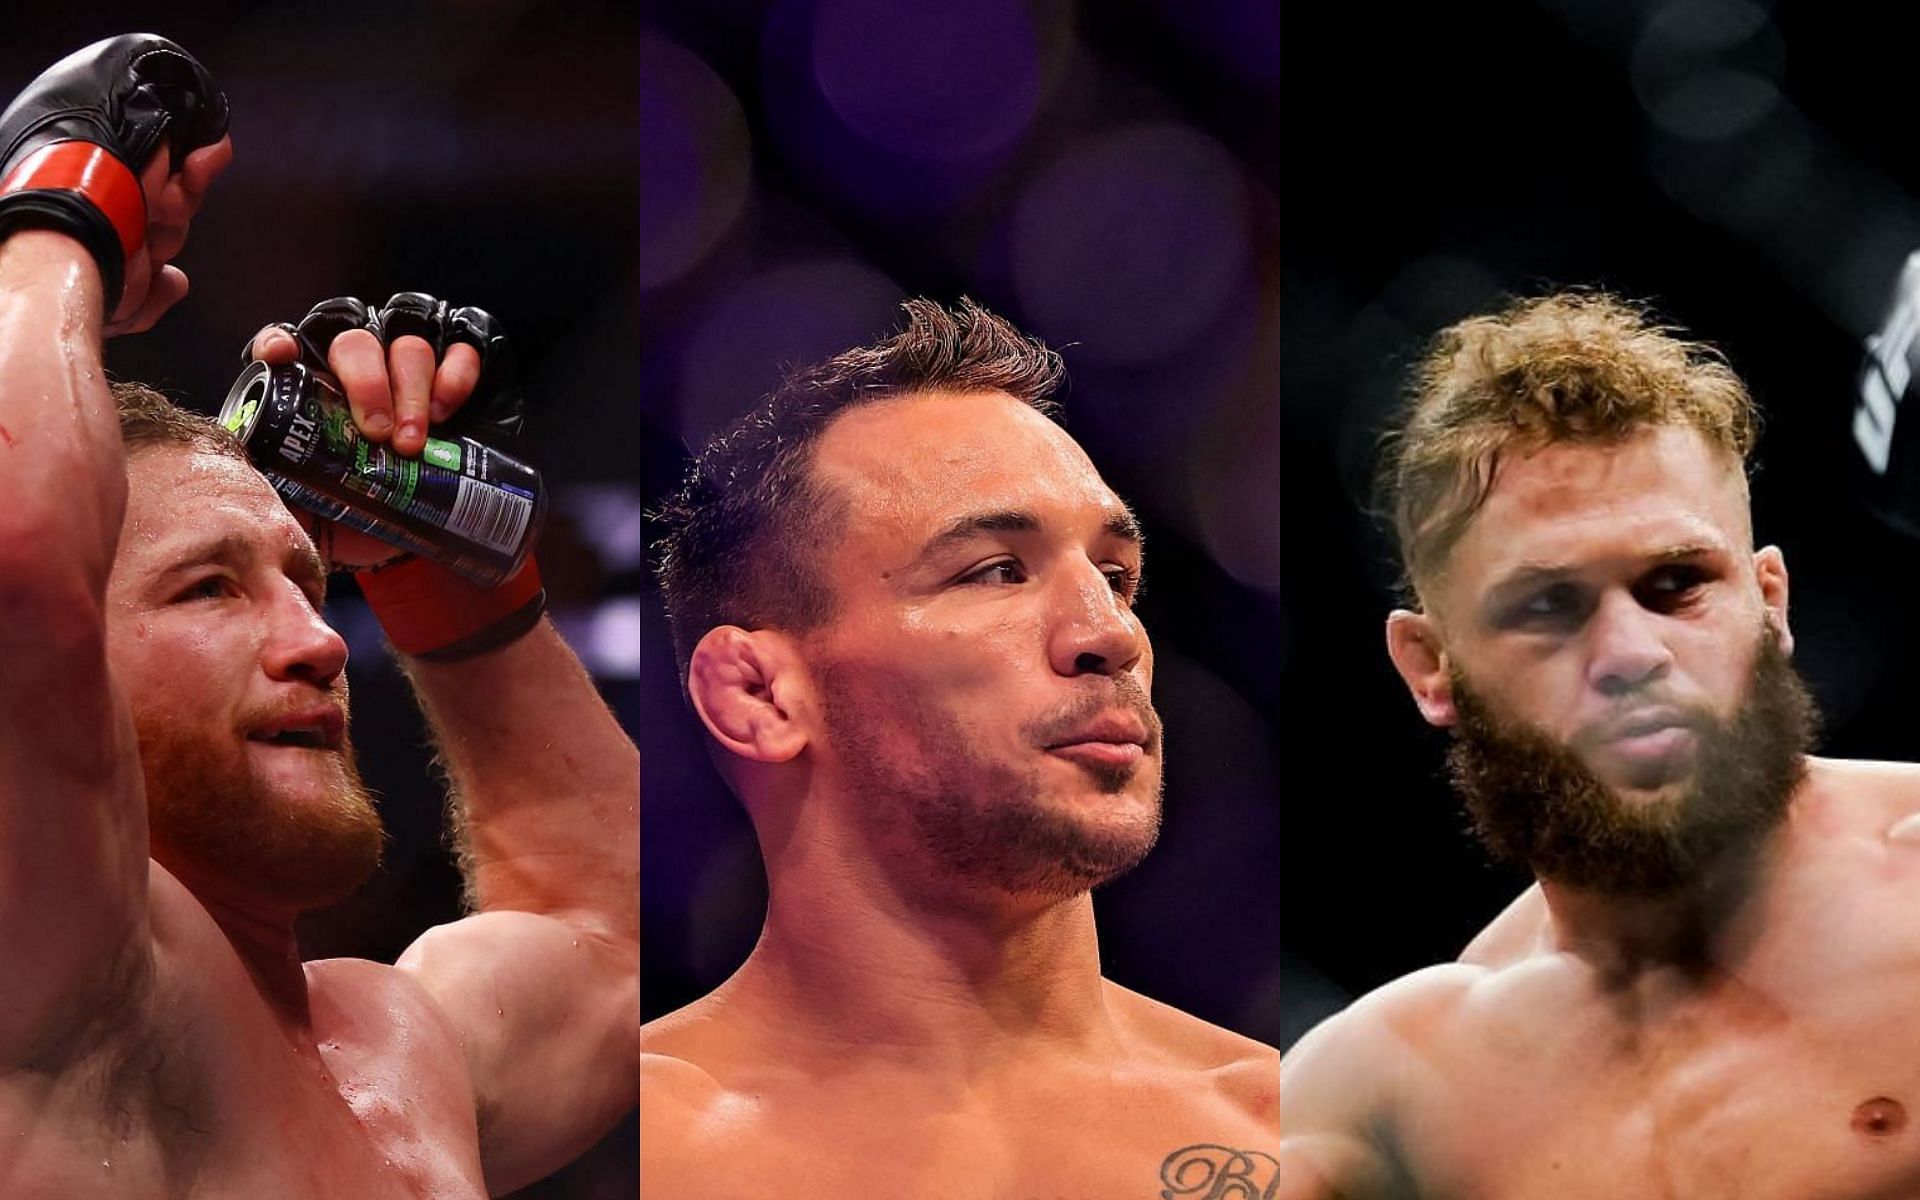 Rafael Fiziev voices his surprise at the durability of Justin Gaethje back at UFC 268